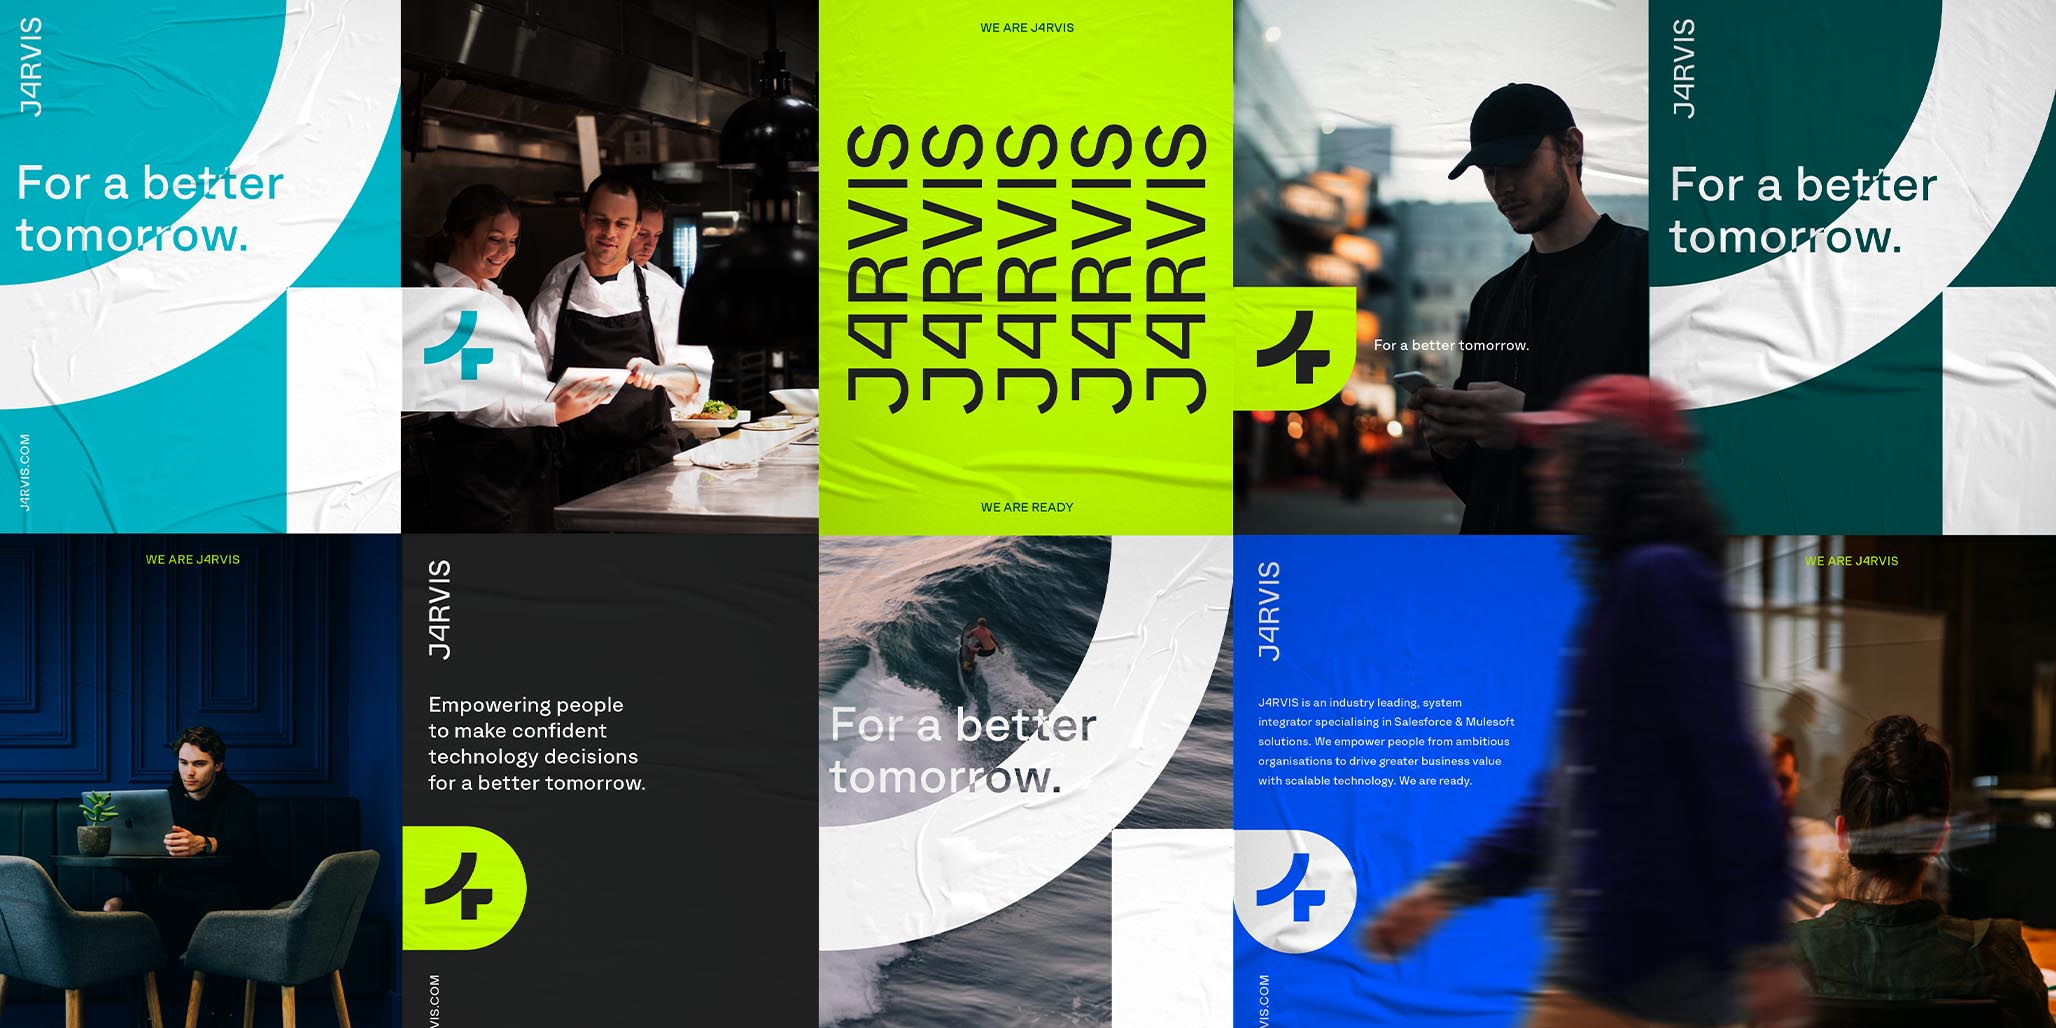 One of the top Sydney branding agencies, Percept was selected by J4RVIS to develop this new brand identity, image C